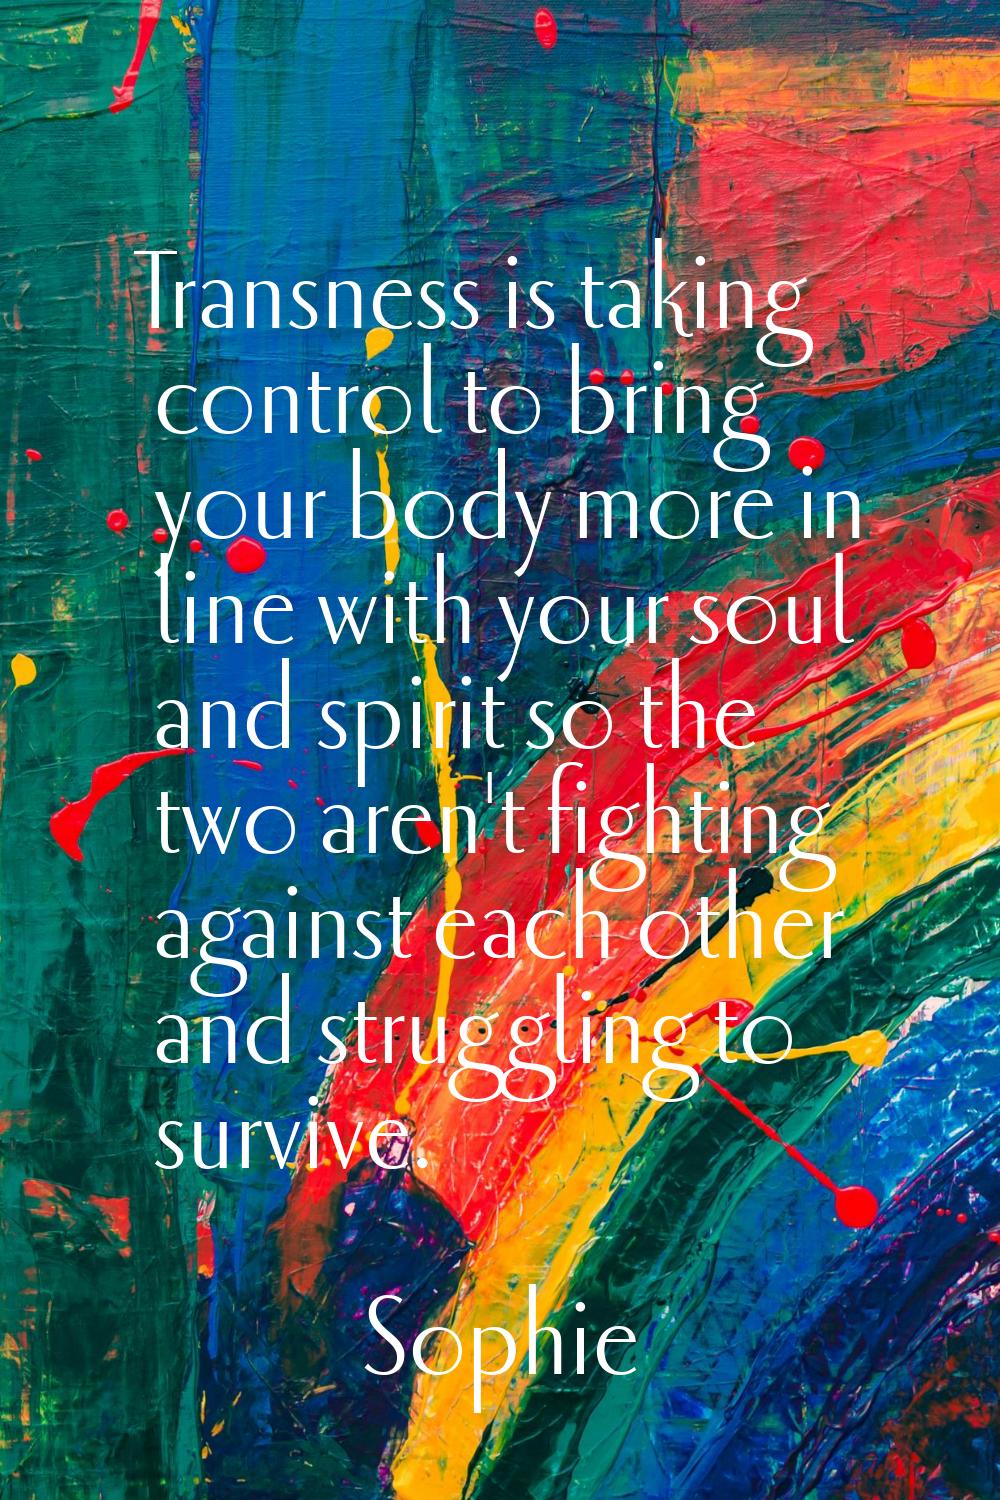 Transness is taking control to bring your body more in line with your soul and spirit so the two ar